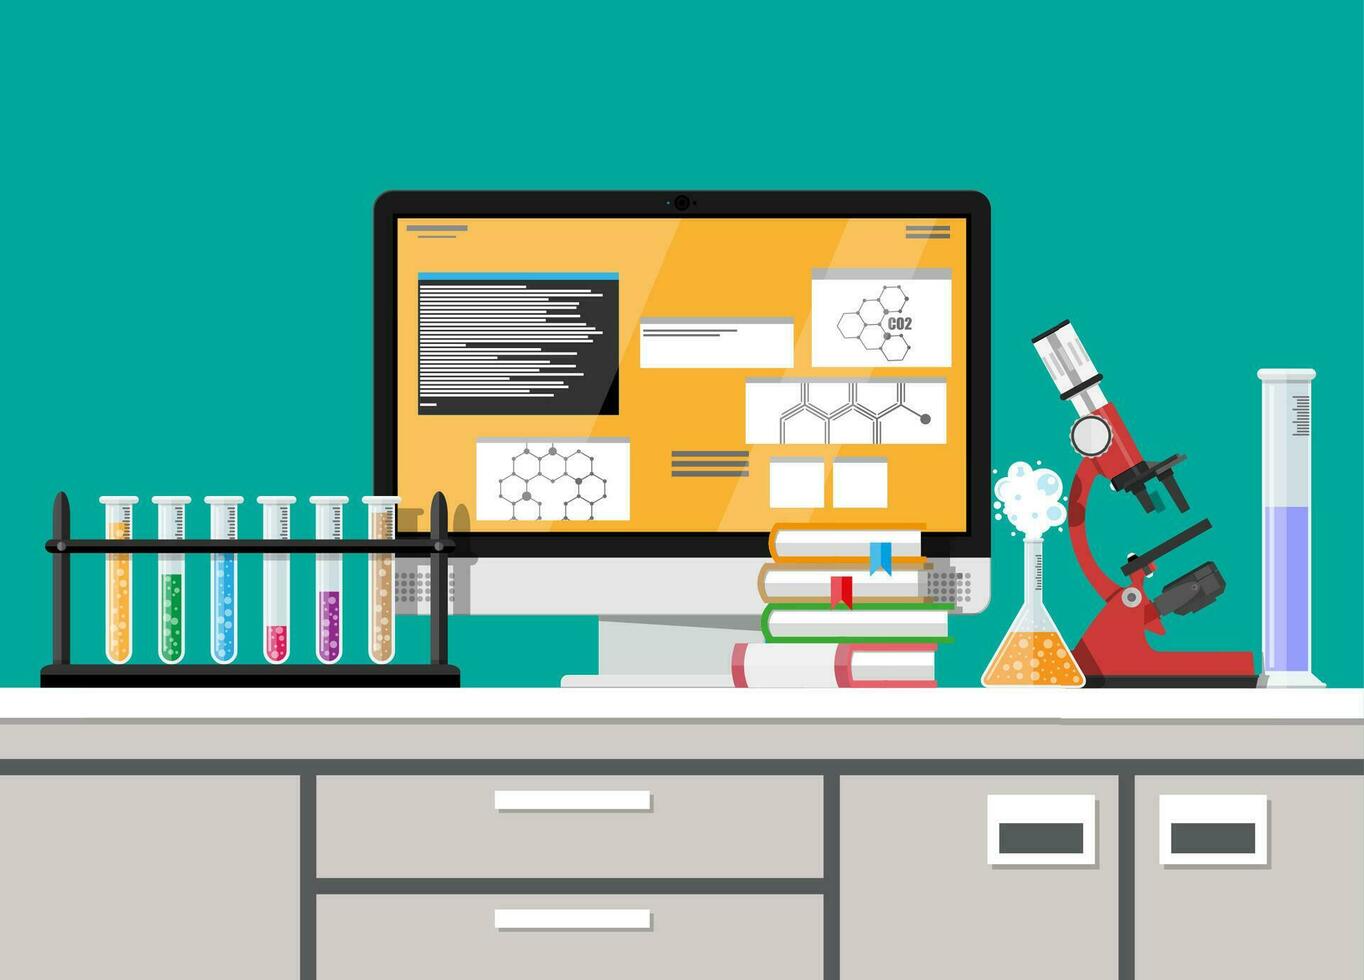 Laboratory equipment, jars, beakers, flasks, microscope and pile of books. Computer with software. Biology science education medical. Vector illustration in flat style